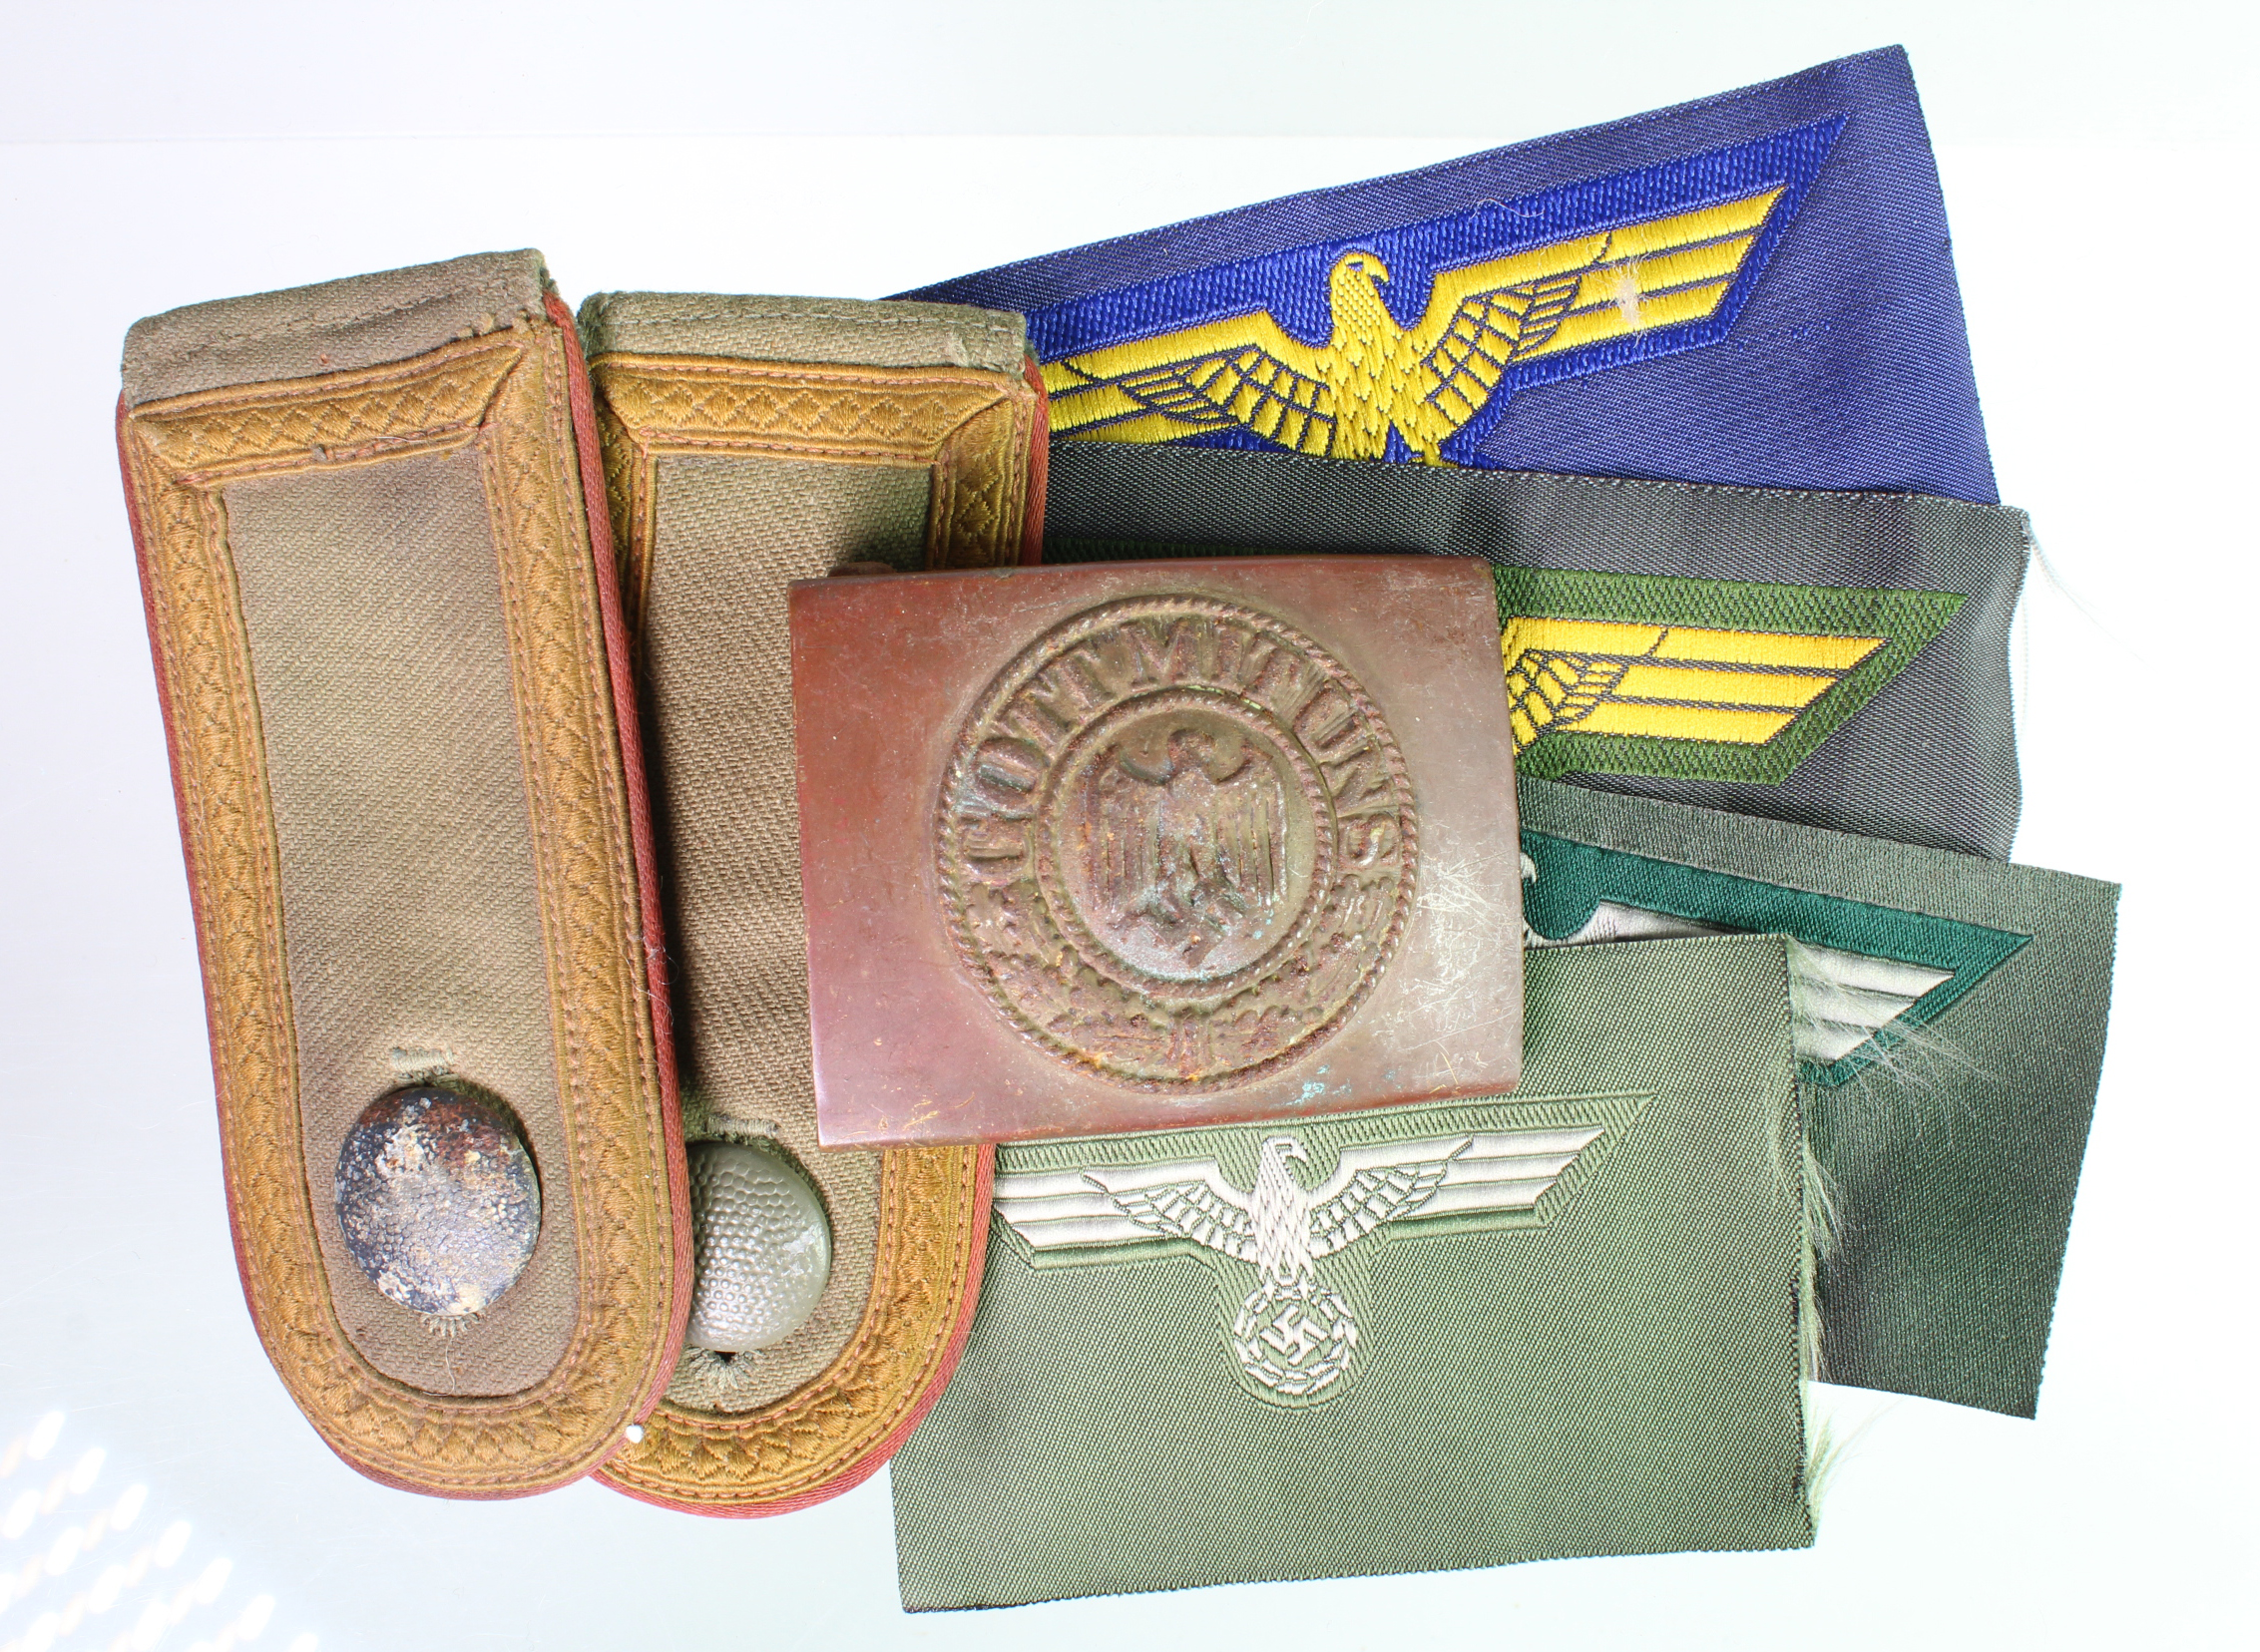 German WW2 matched pair of Africa Korps epaulets with army belt buckle and four uncut sets of breast